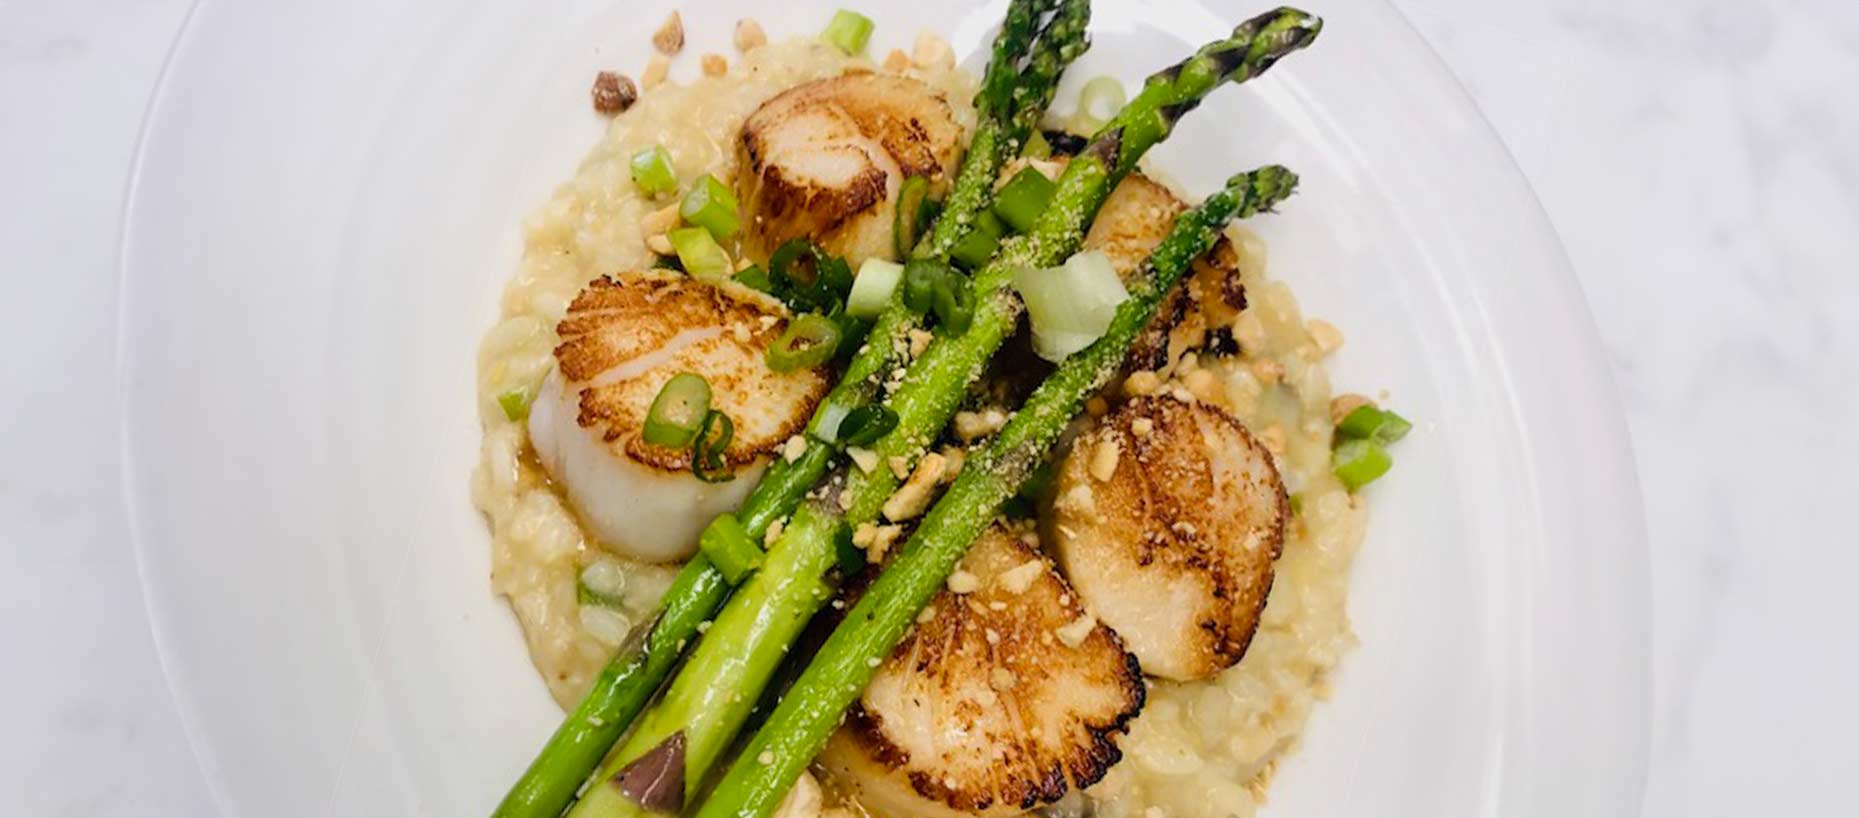 braised scallops on bed of risotto with grilled asparagus on top<br />
